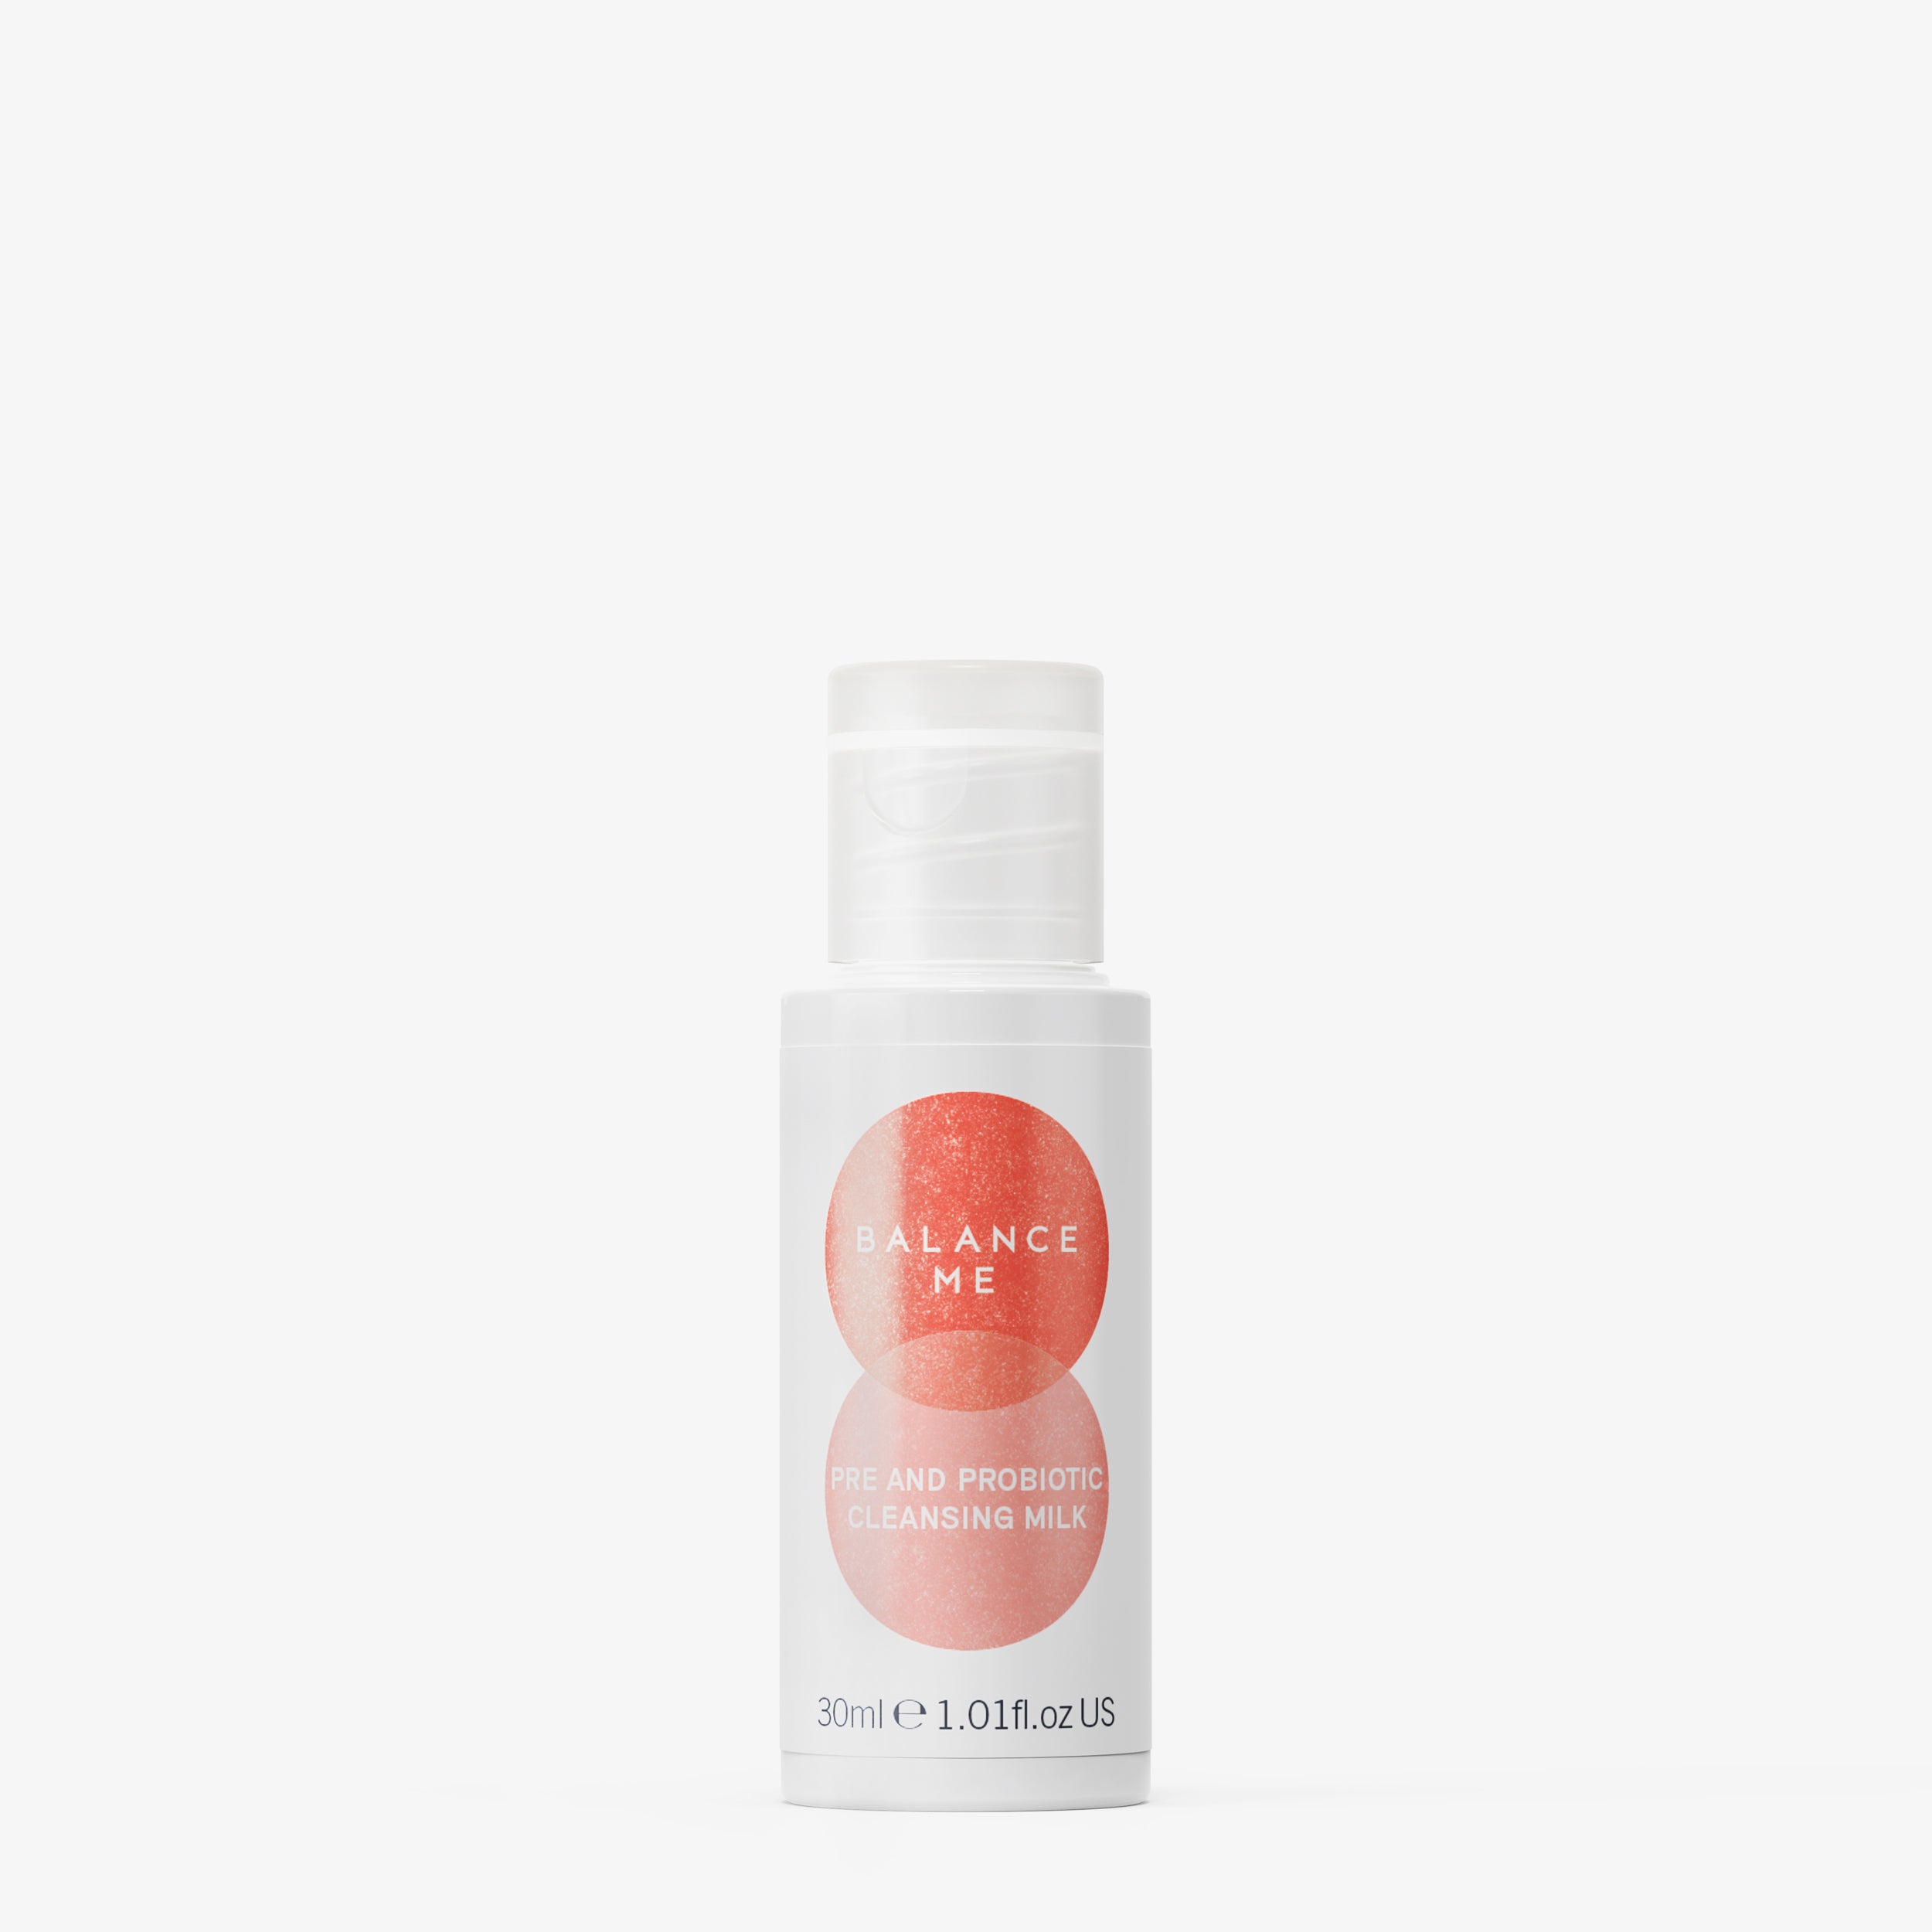 Fragrance Free Pre and Probiotic Cleansing Milk 30ml